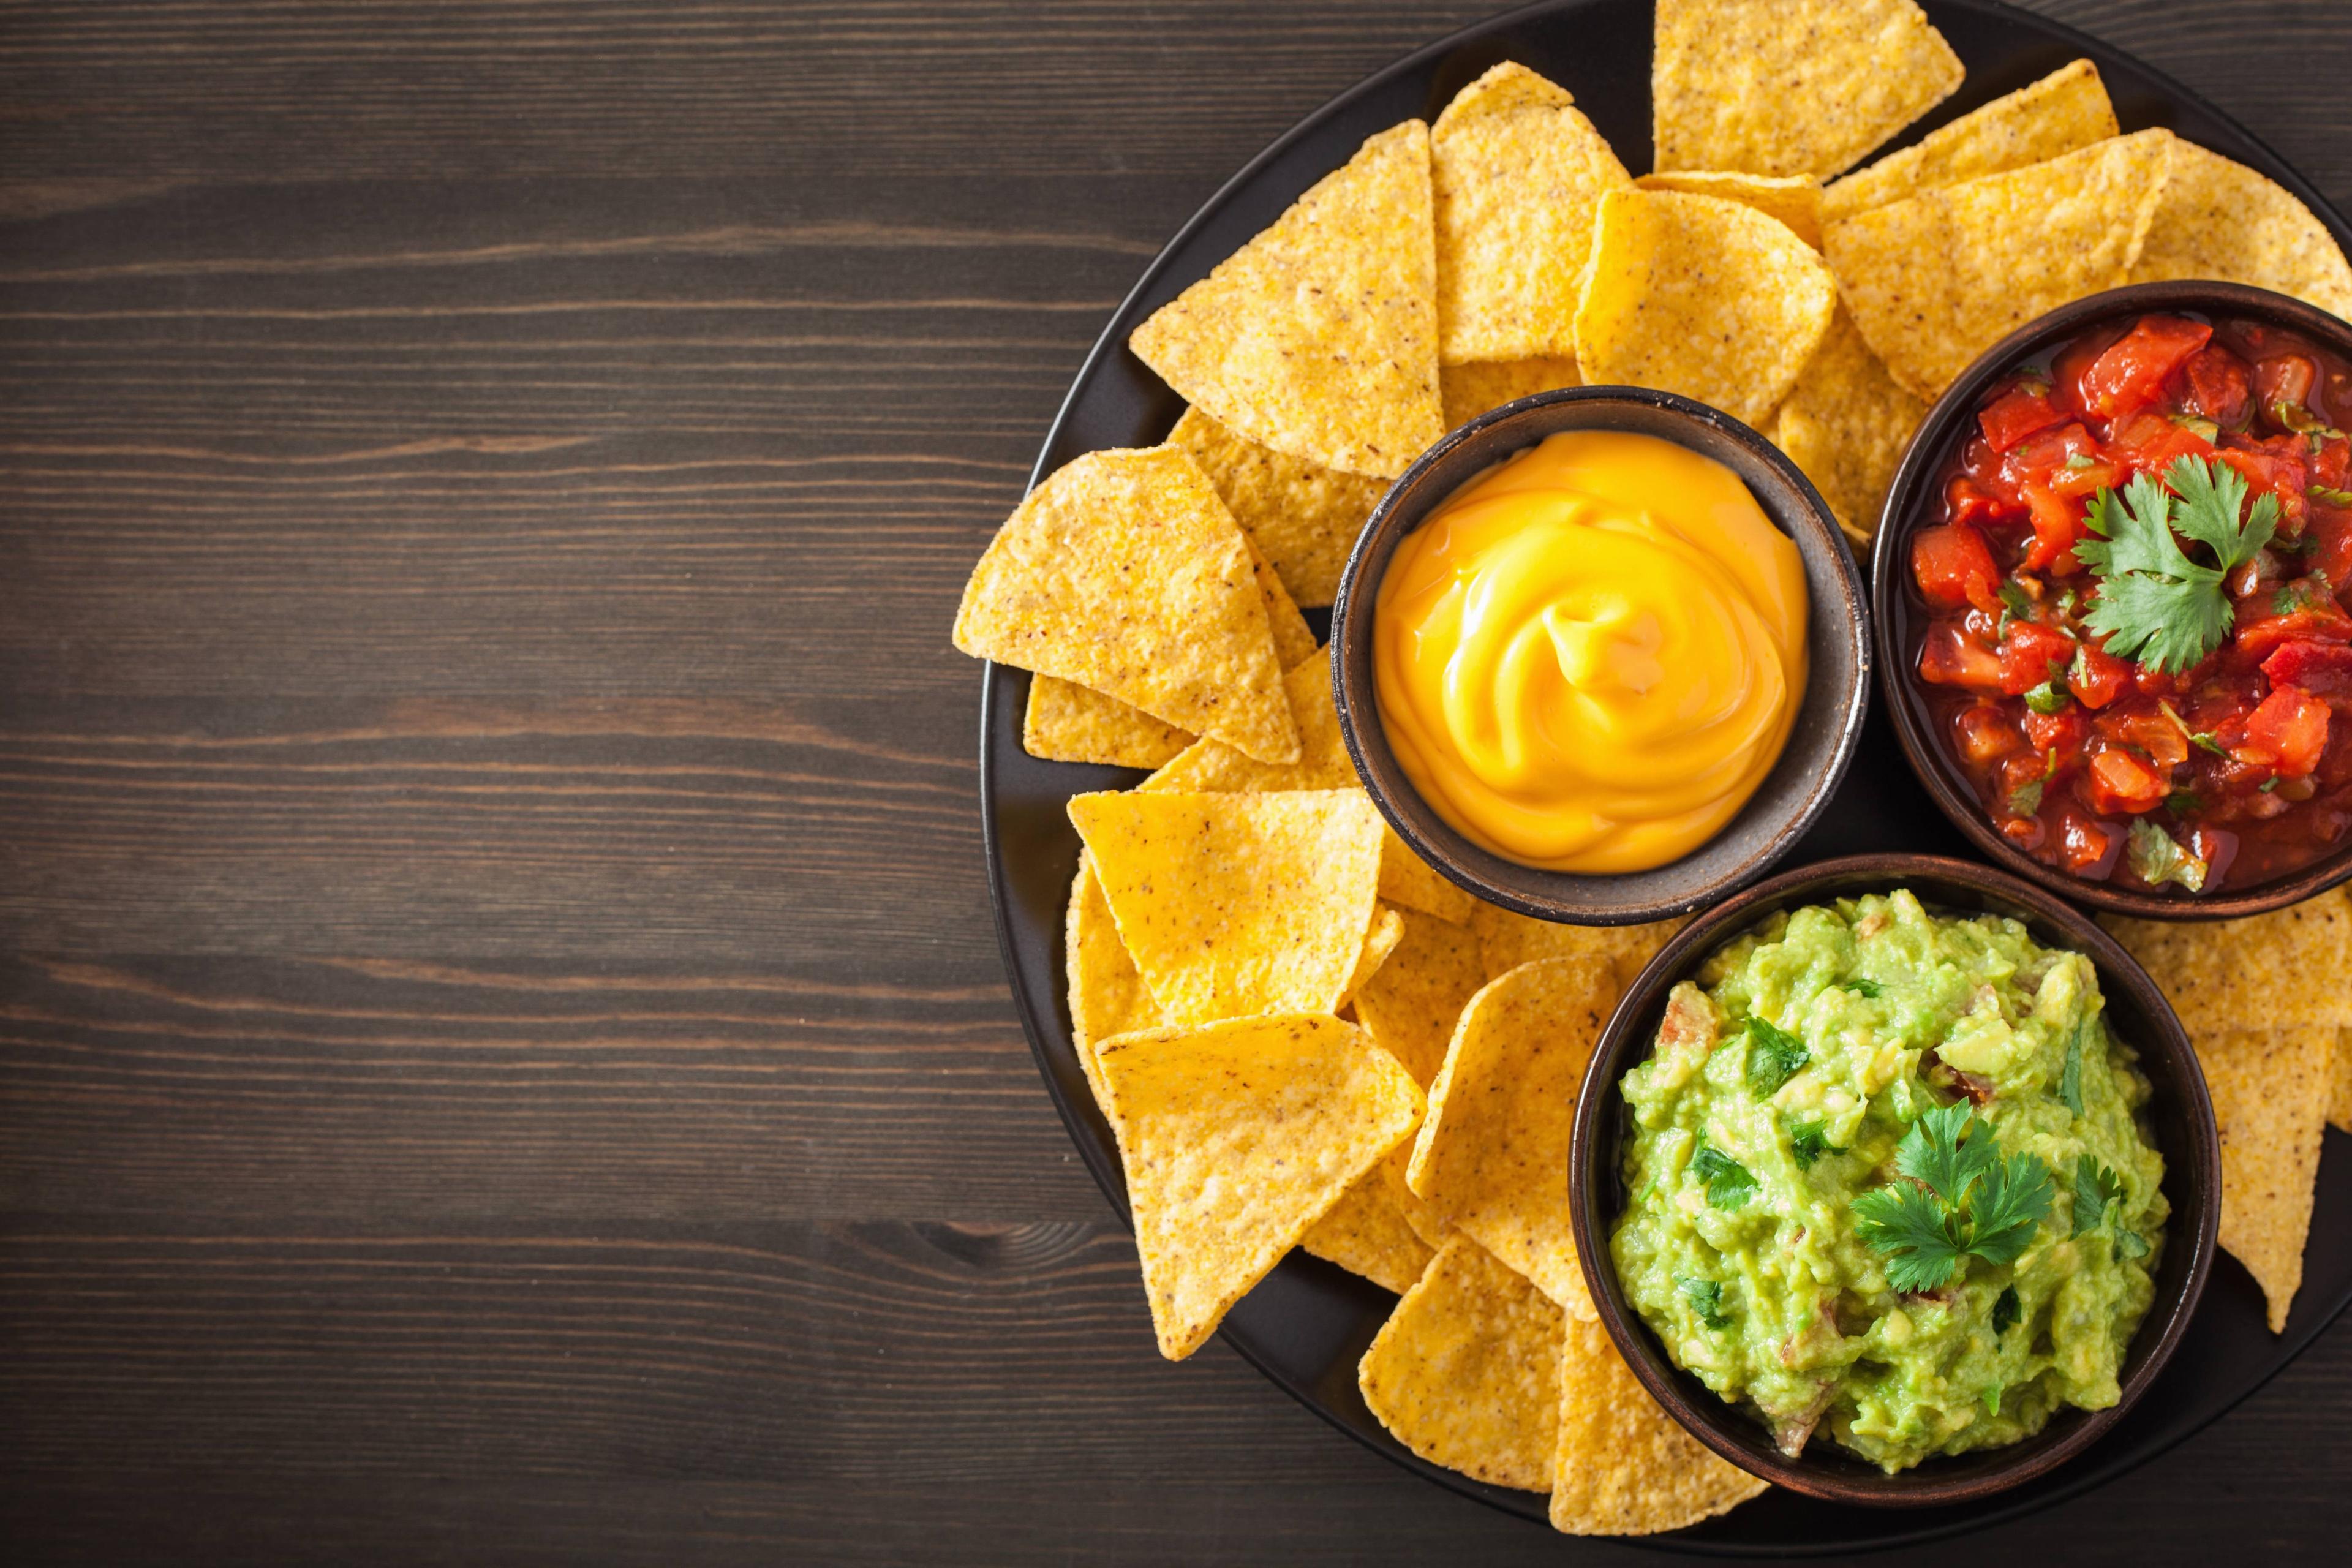 Dips, Chips, And Other Tips: Three Top Investors’ Recommendations For This Quarter